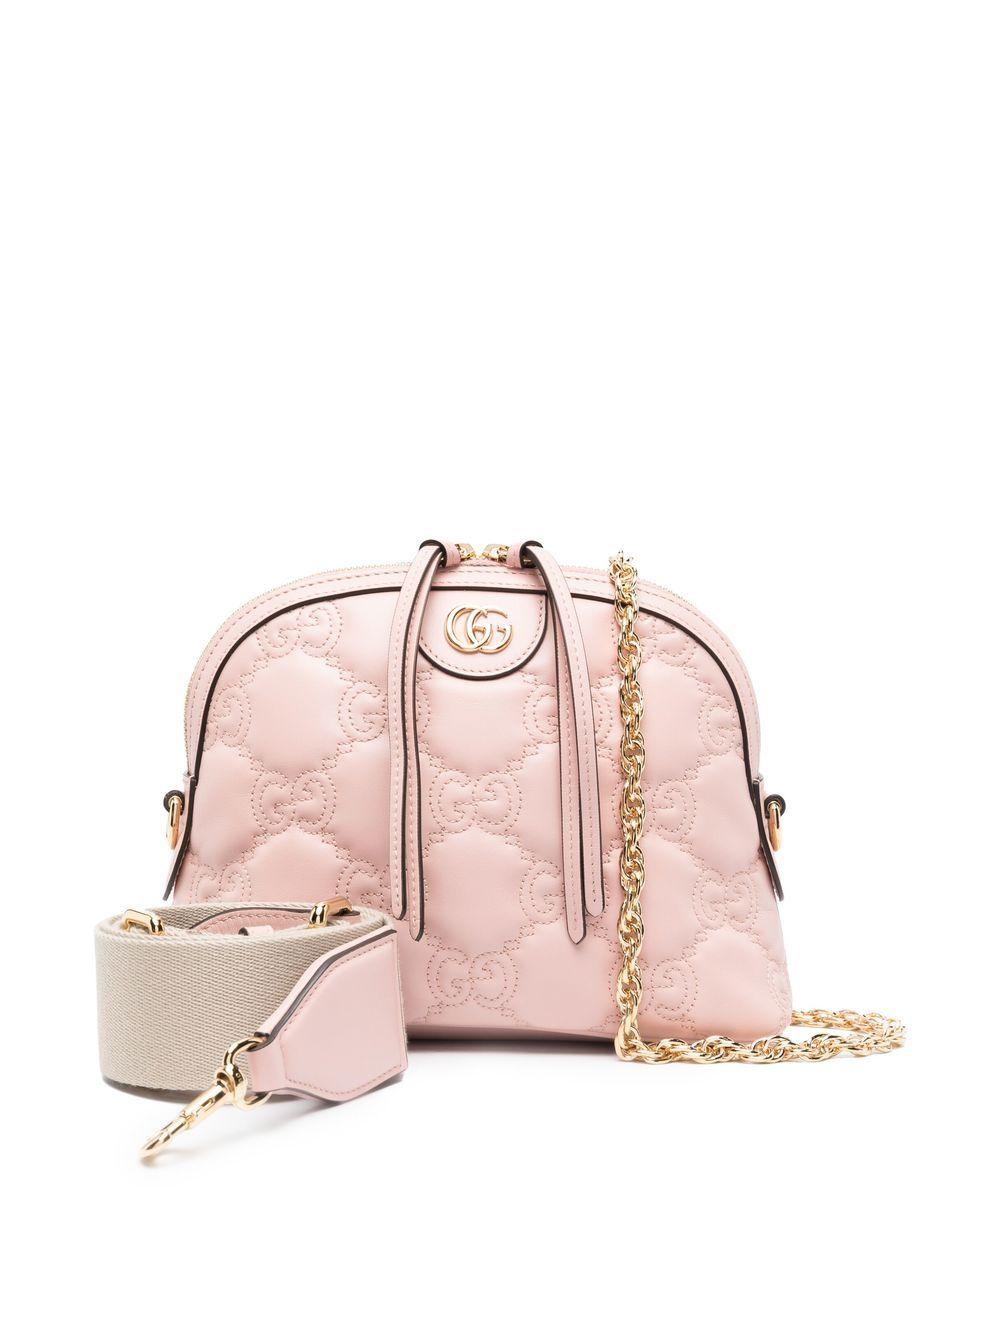 Gucci Ophidia Mini Backpack White in Calfskin Leather with Gold